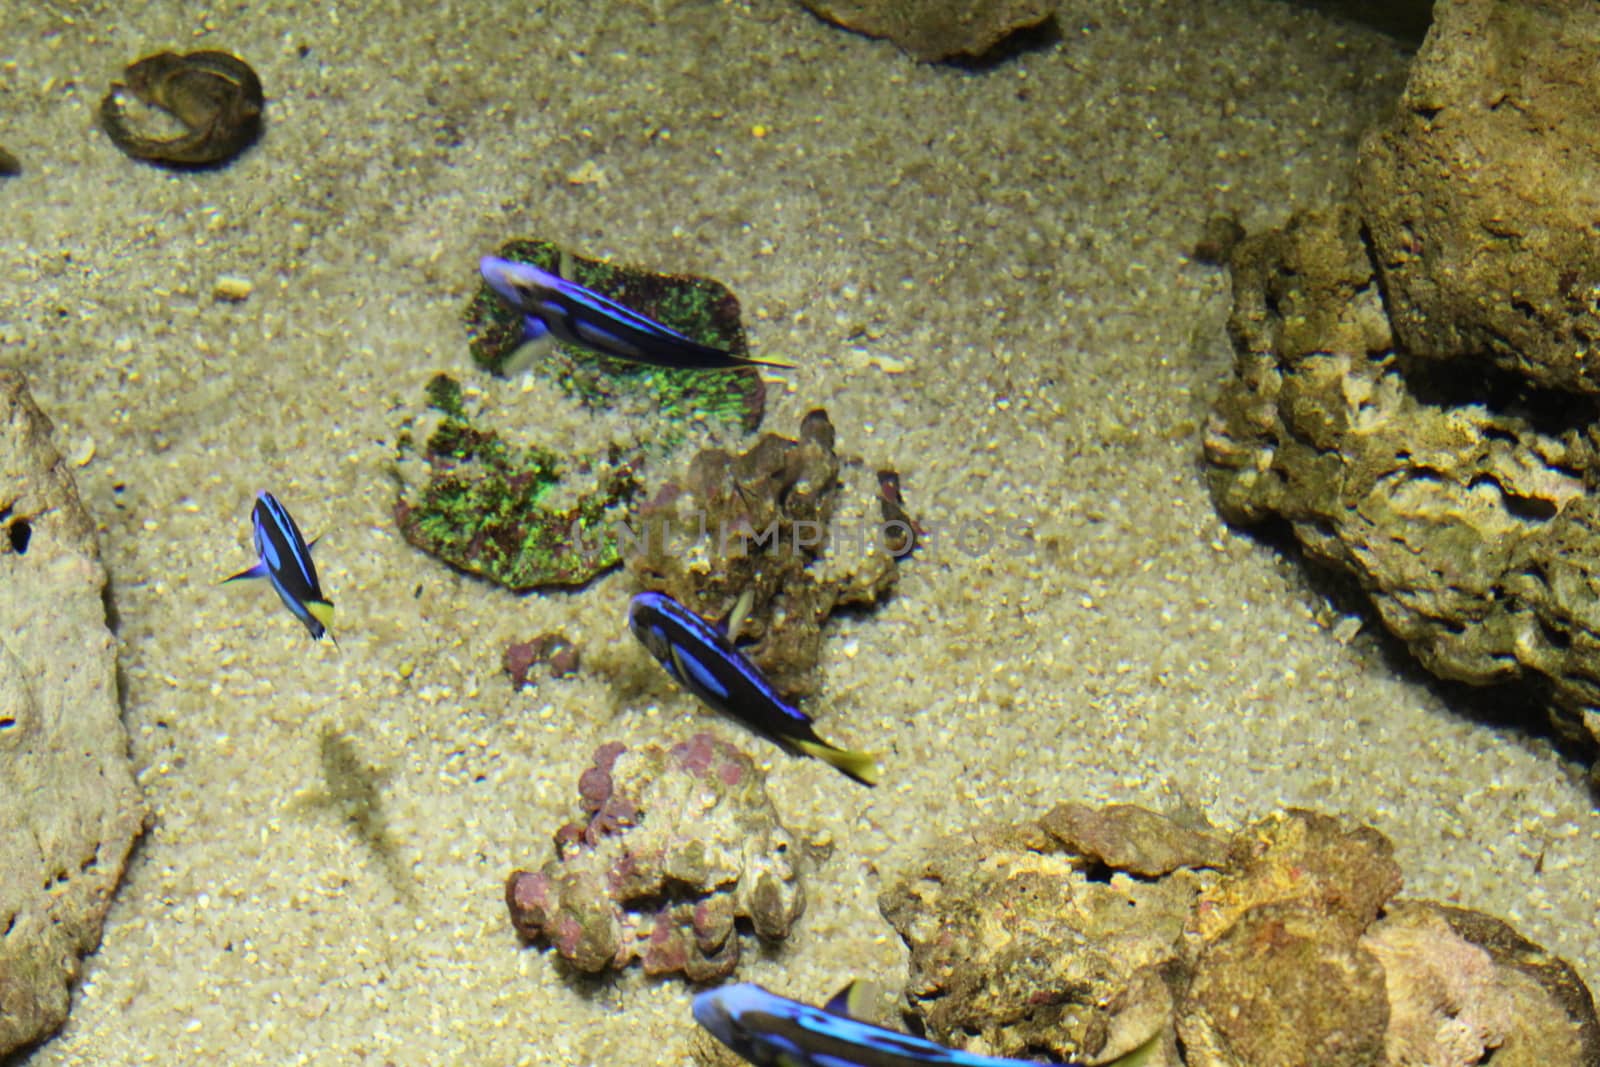 A flock of fish, different species and colors.